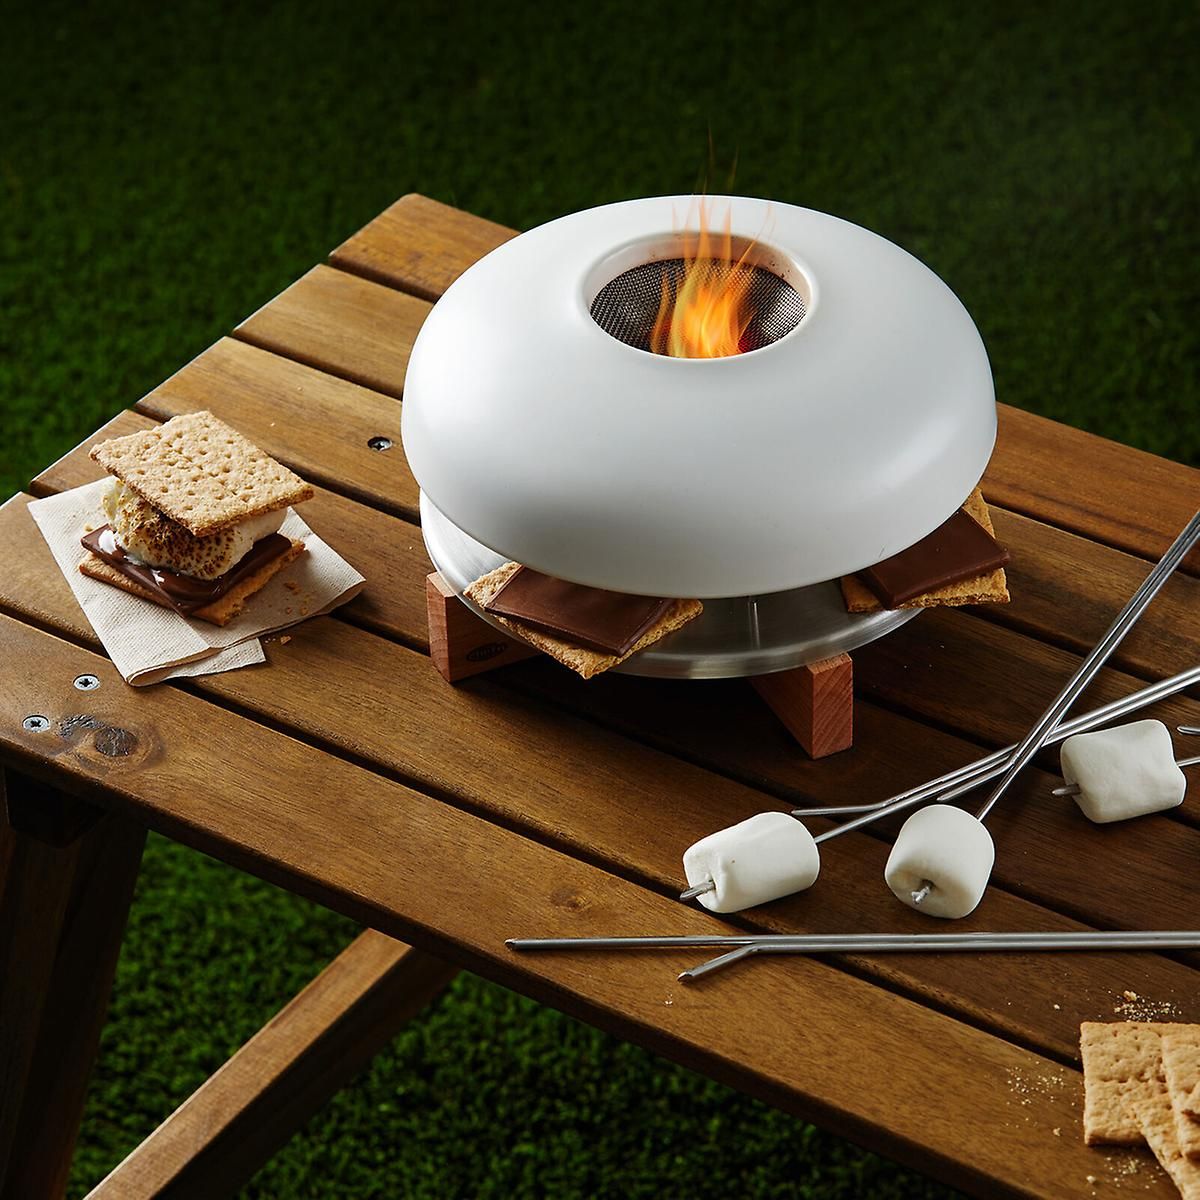 Chef'n S'mores Maker | The Container Store